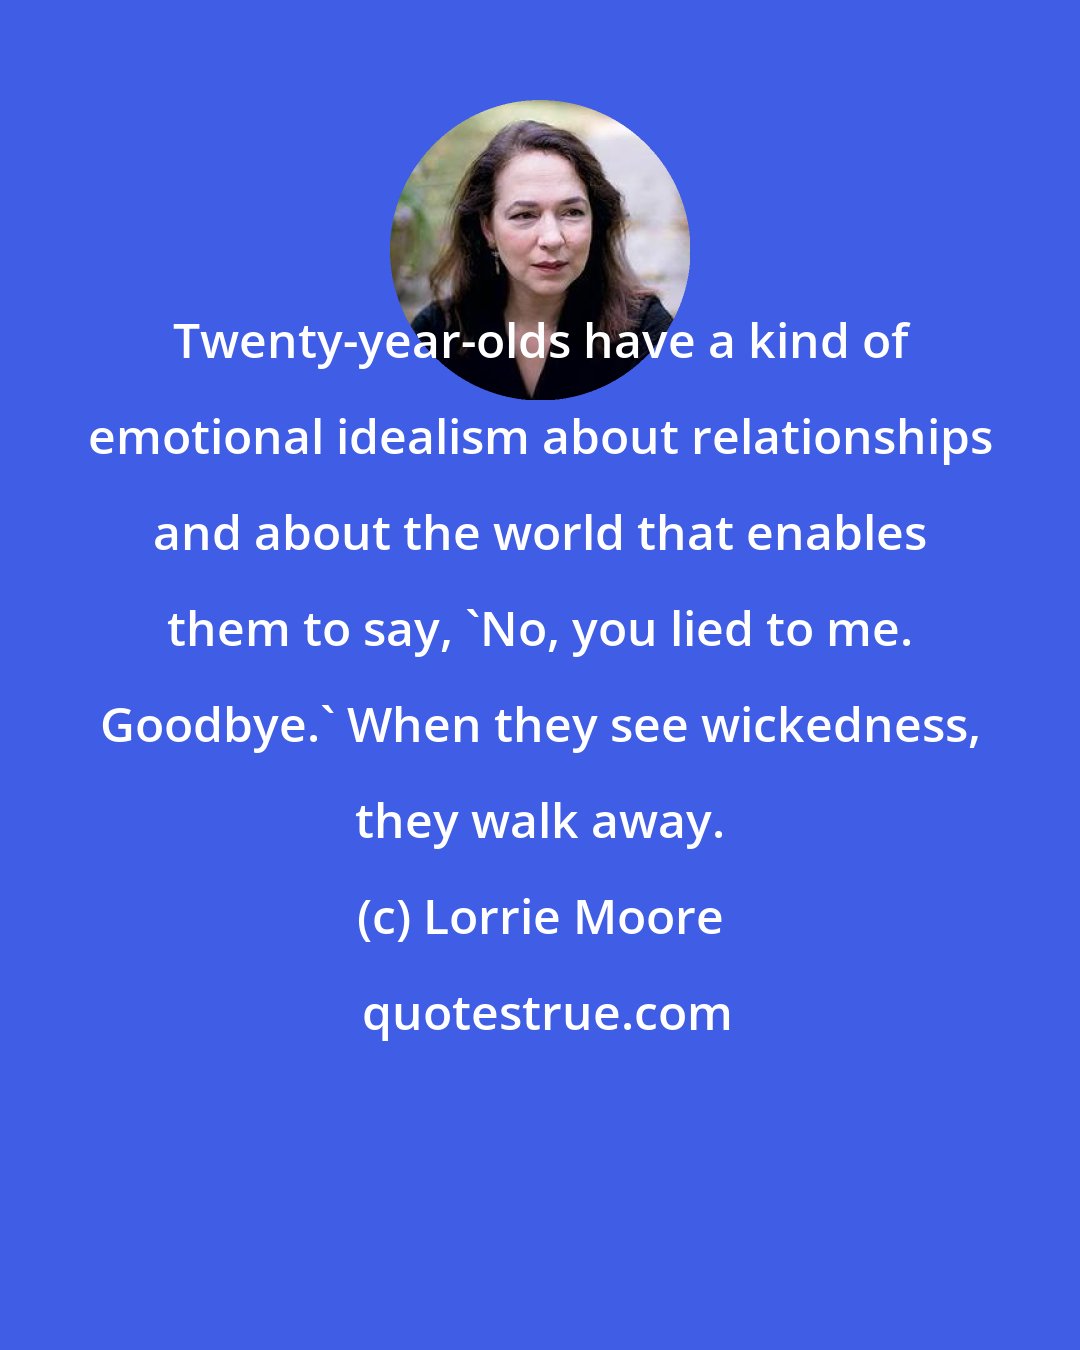 Lorrie Moore: Twenty-year-olds have a kind of emotional idealism about relationships and about the world that enables them to say, 'No, you lied to me. Goodbye.' When they see wickedness, they walk away.